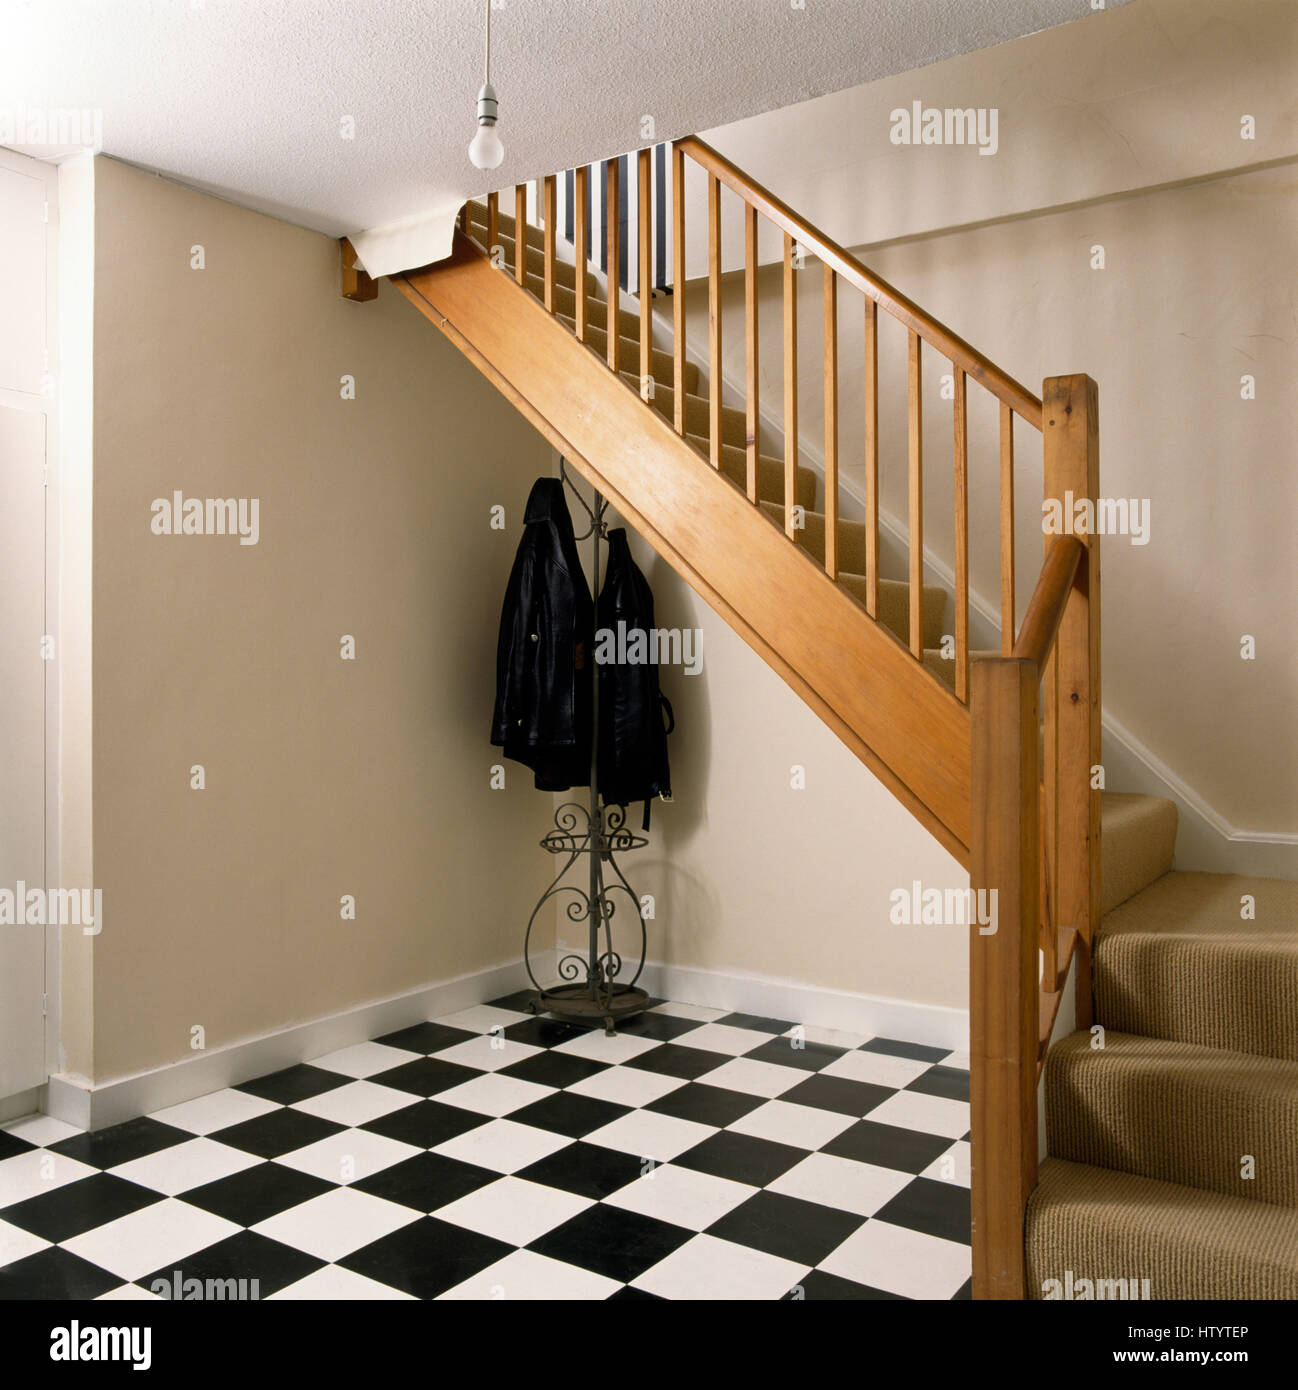 Black+white chequerboard floor in hall with wooden staircase and a simple coat stand Stock Photo